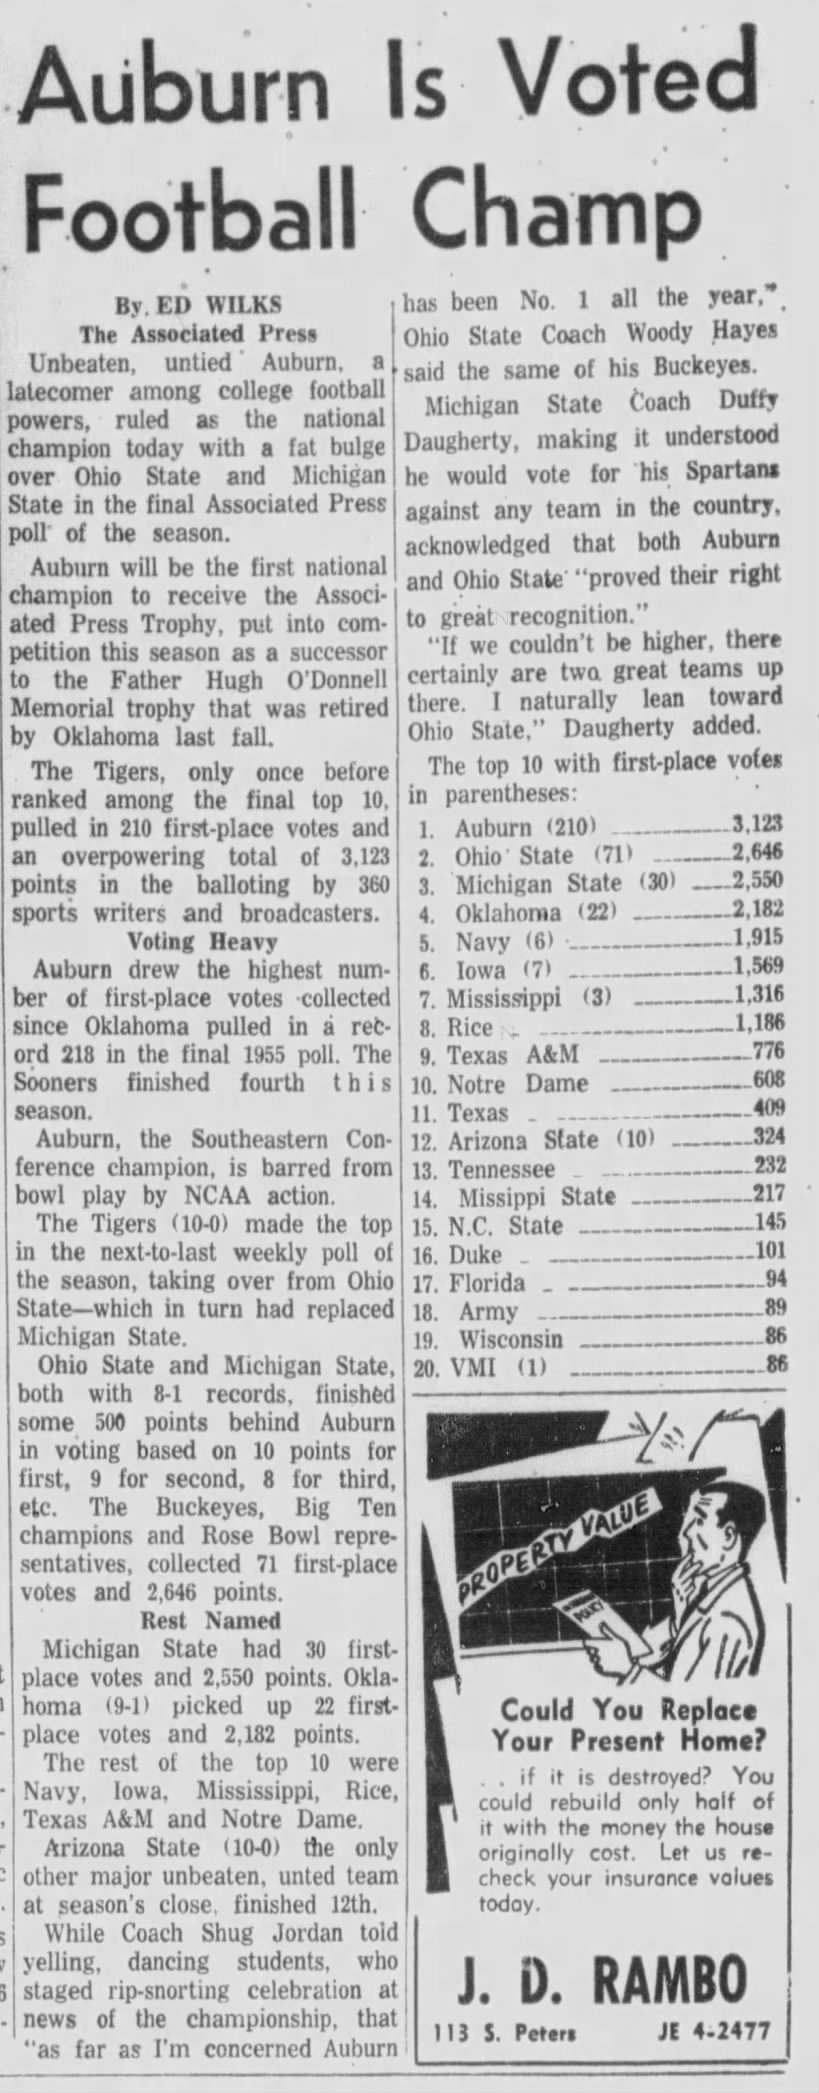 Auburn Is Voted Football Champ 1957; first national champion to receive the Associated Press Trophy